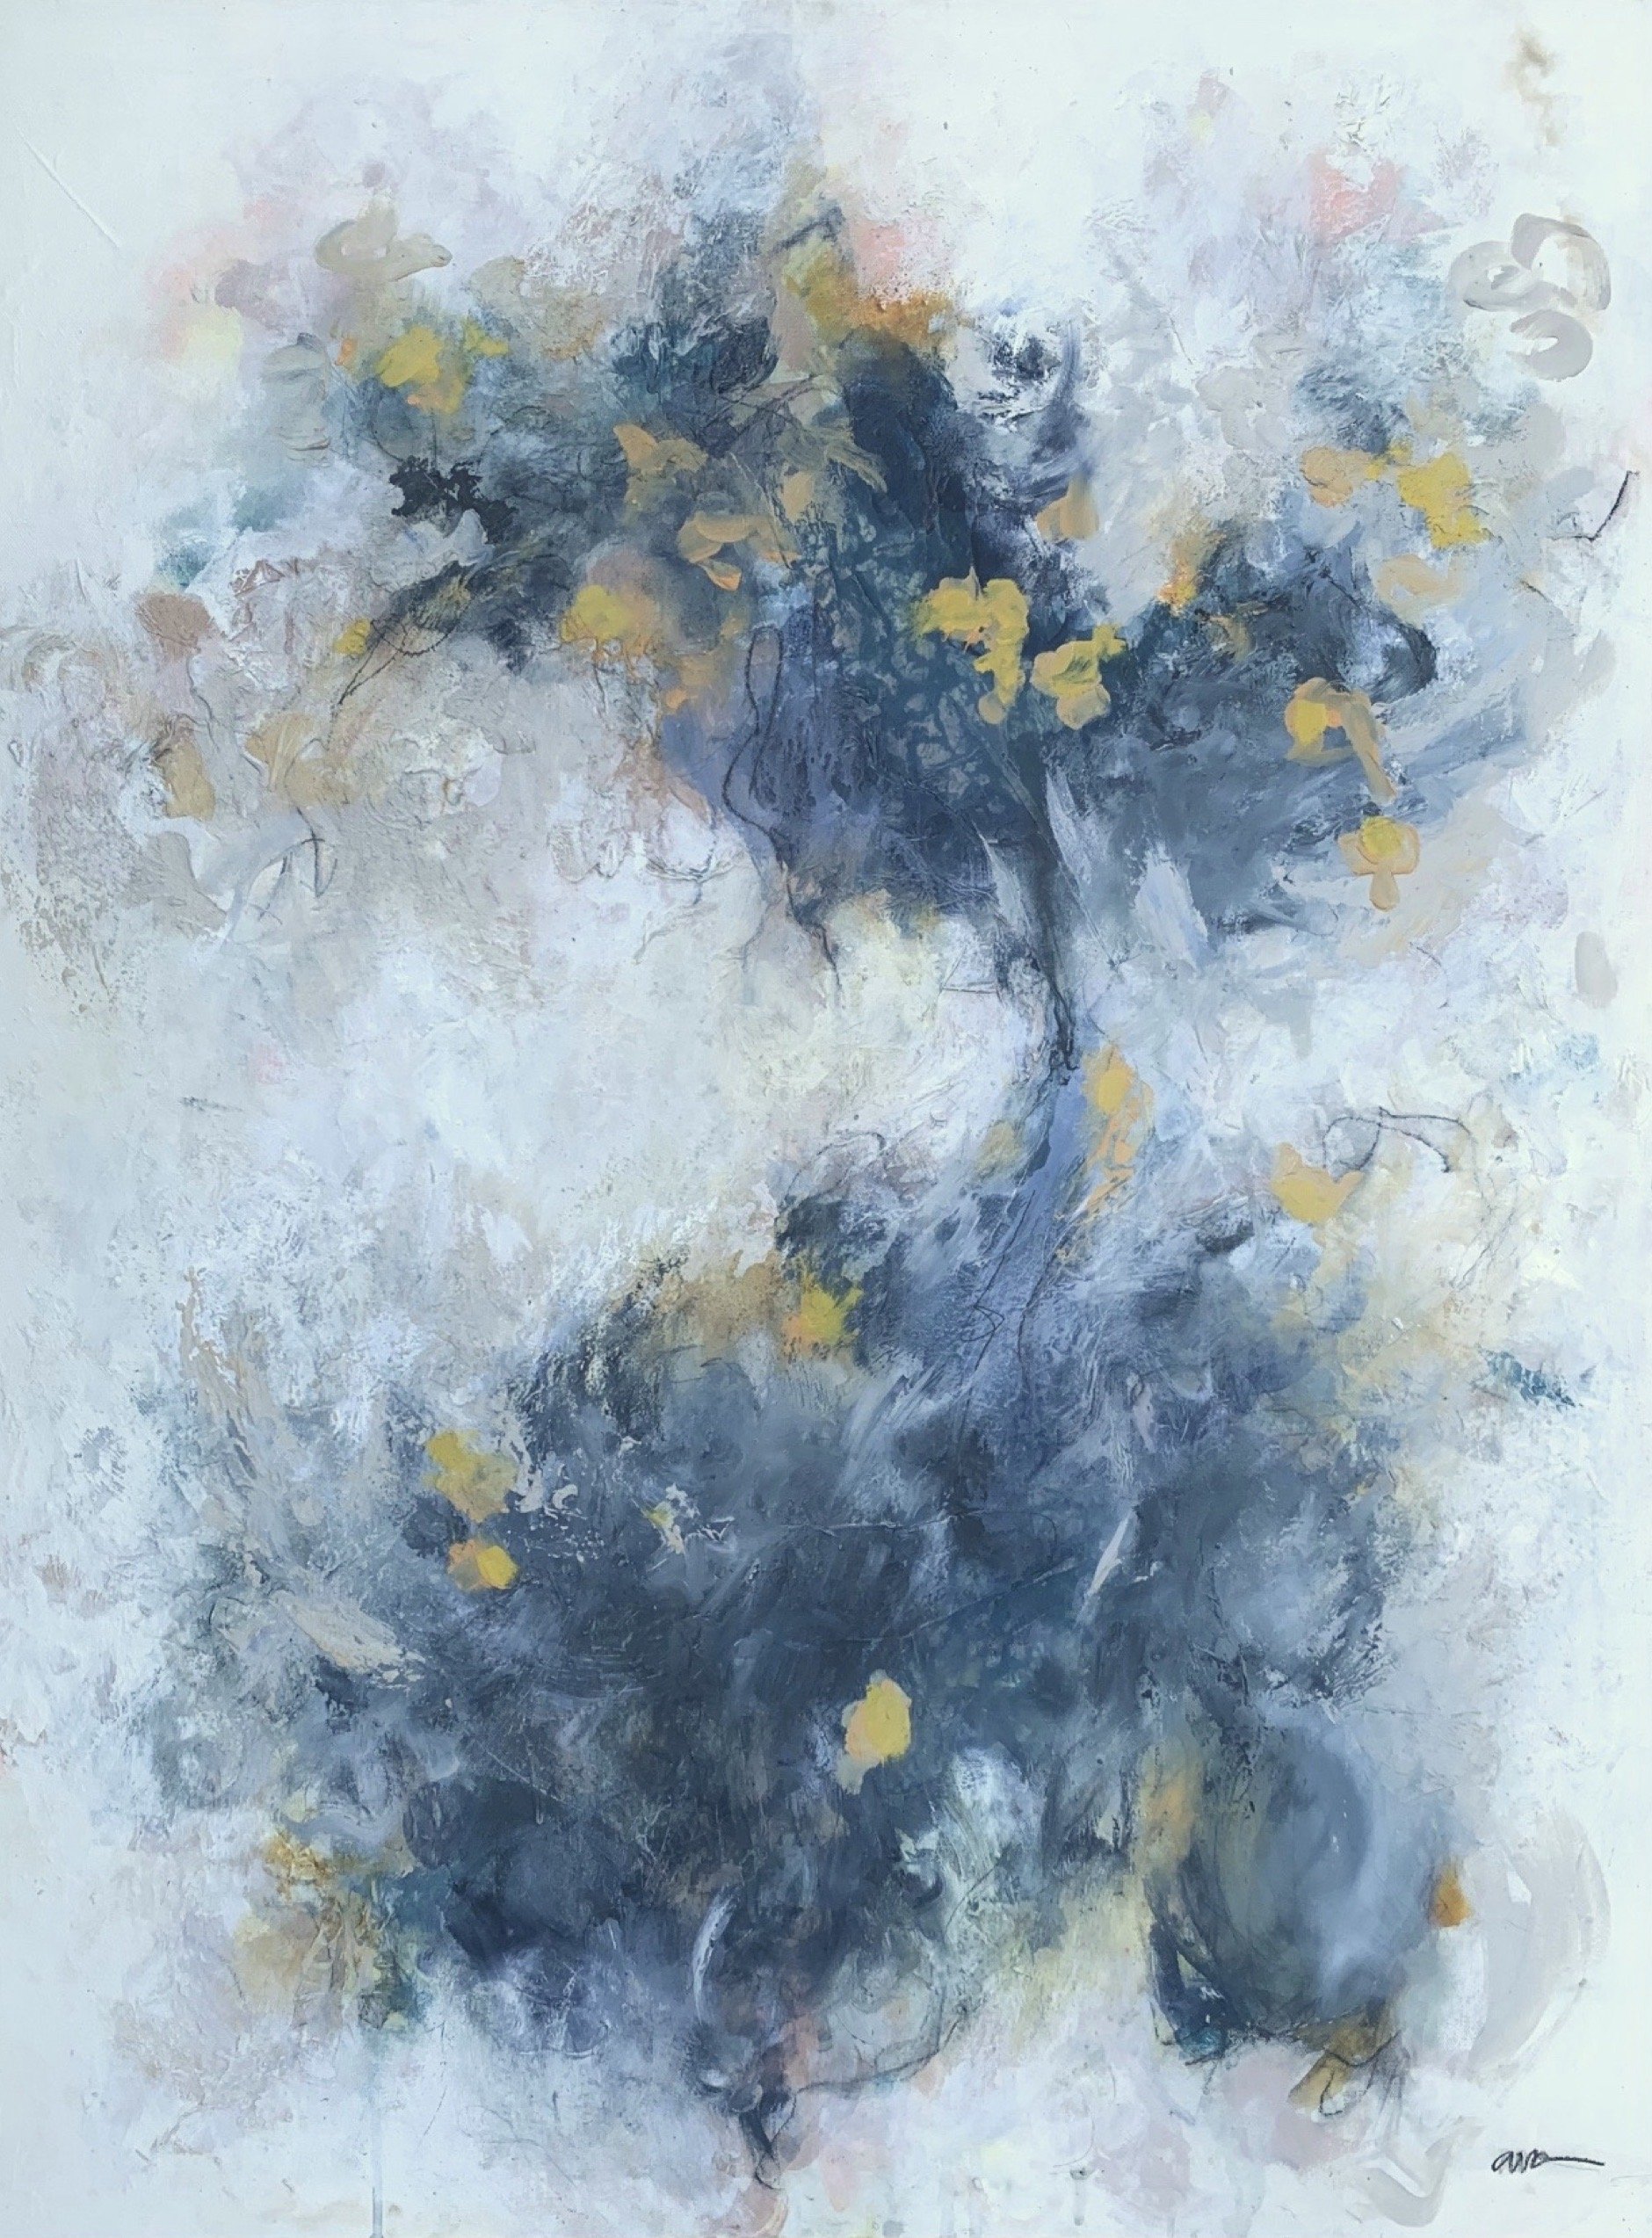 Blue Dichotomy Mixed Media on Canvas, 40 x 30 in., 2022 &lt;em&gt;Private Collection&lt;/em&gt;